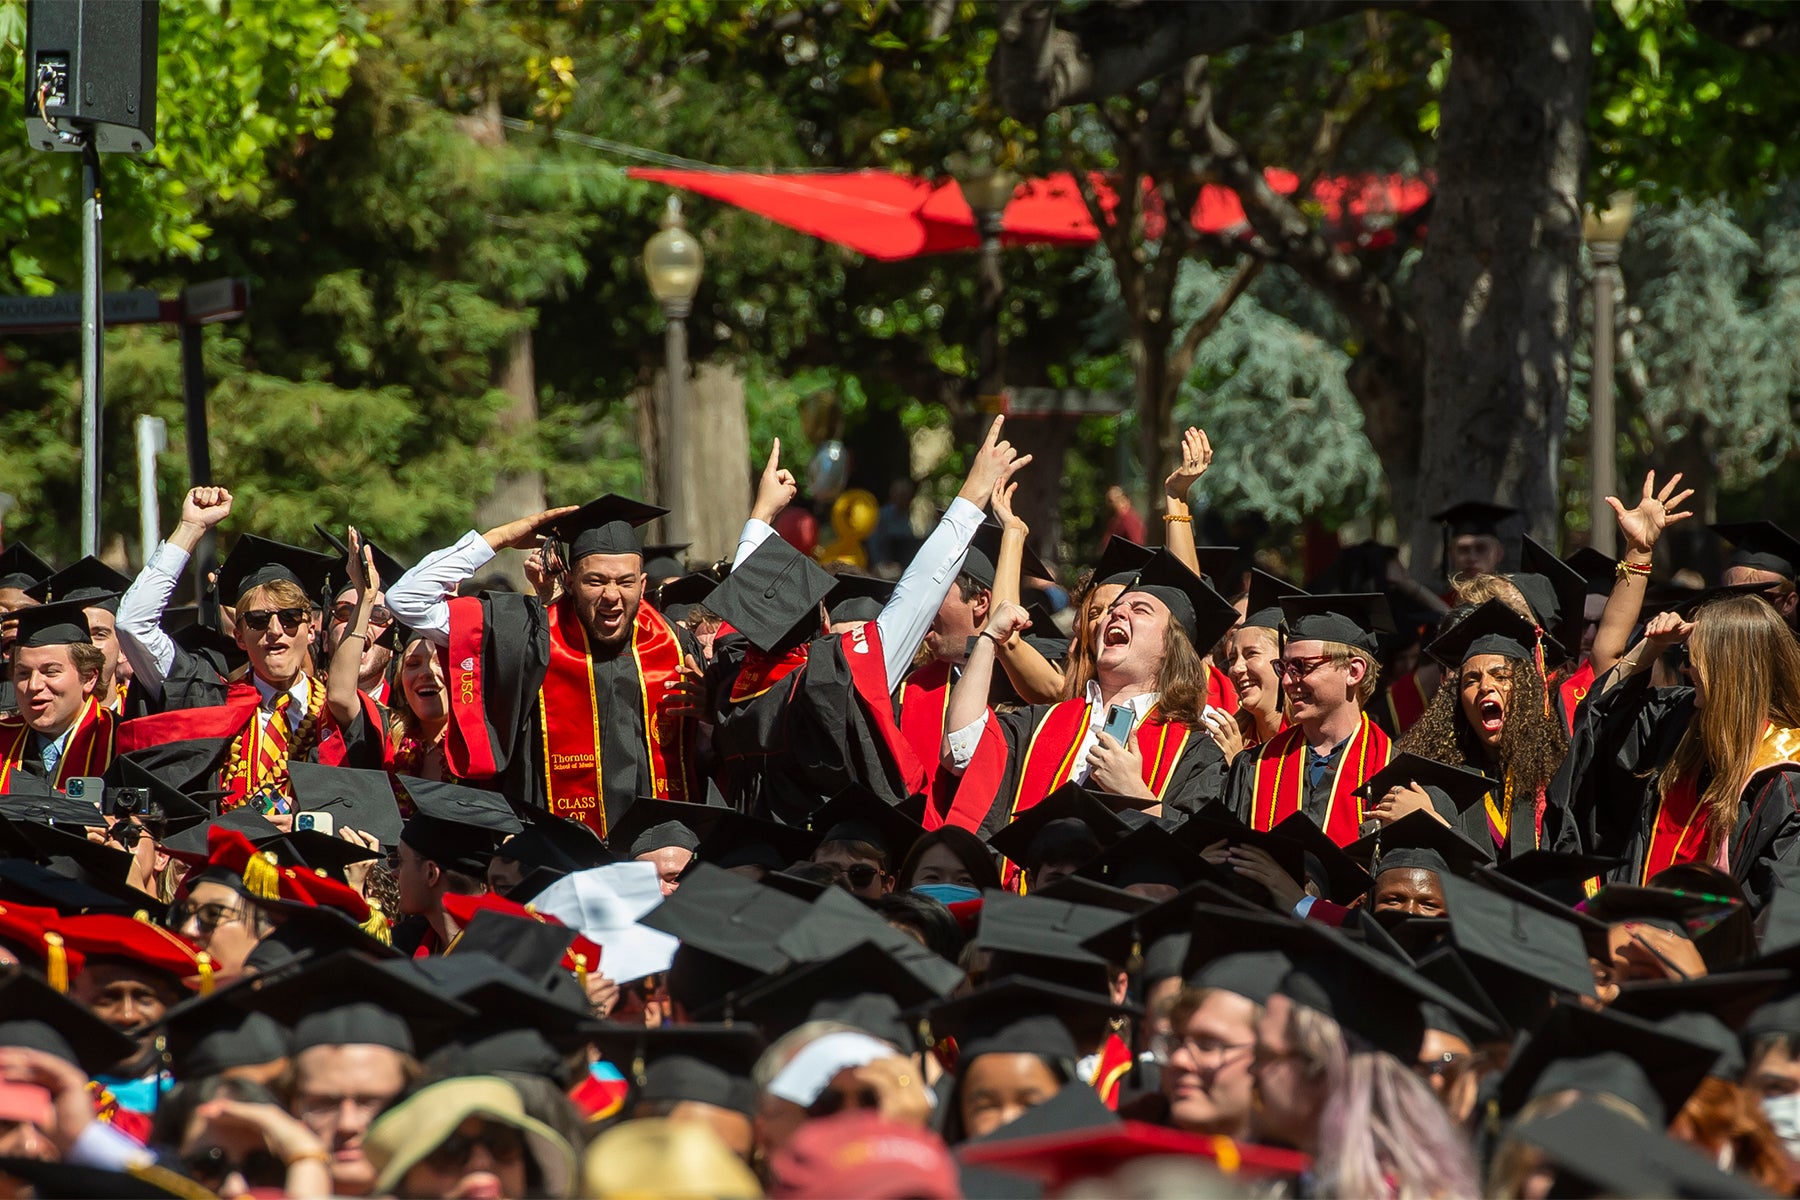 USC celebrates the Class of 2022 at university's 139th commencement